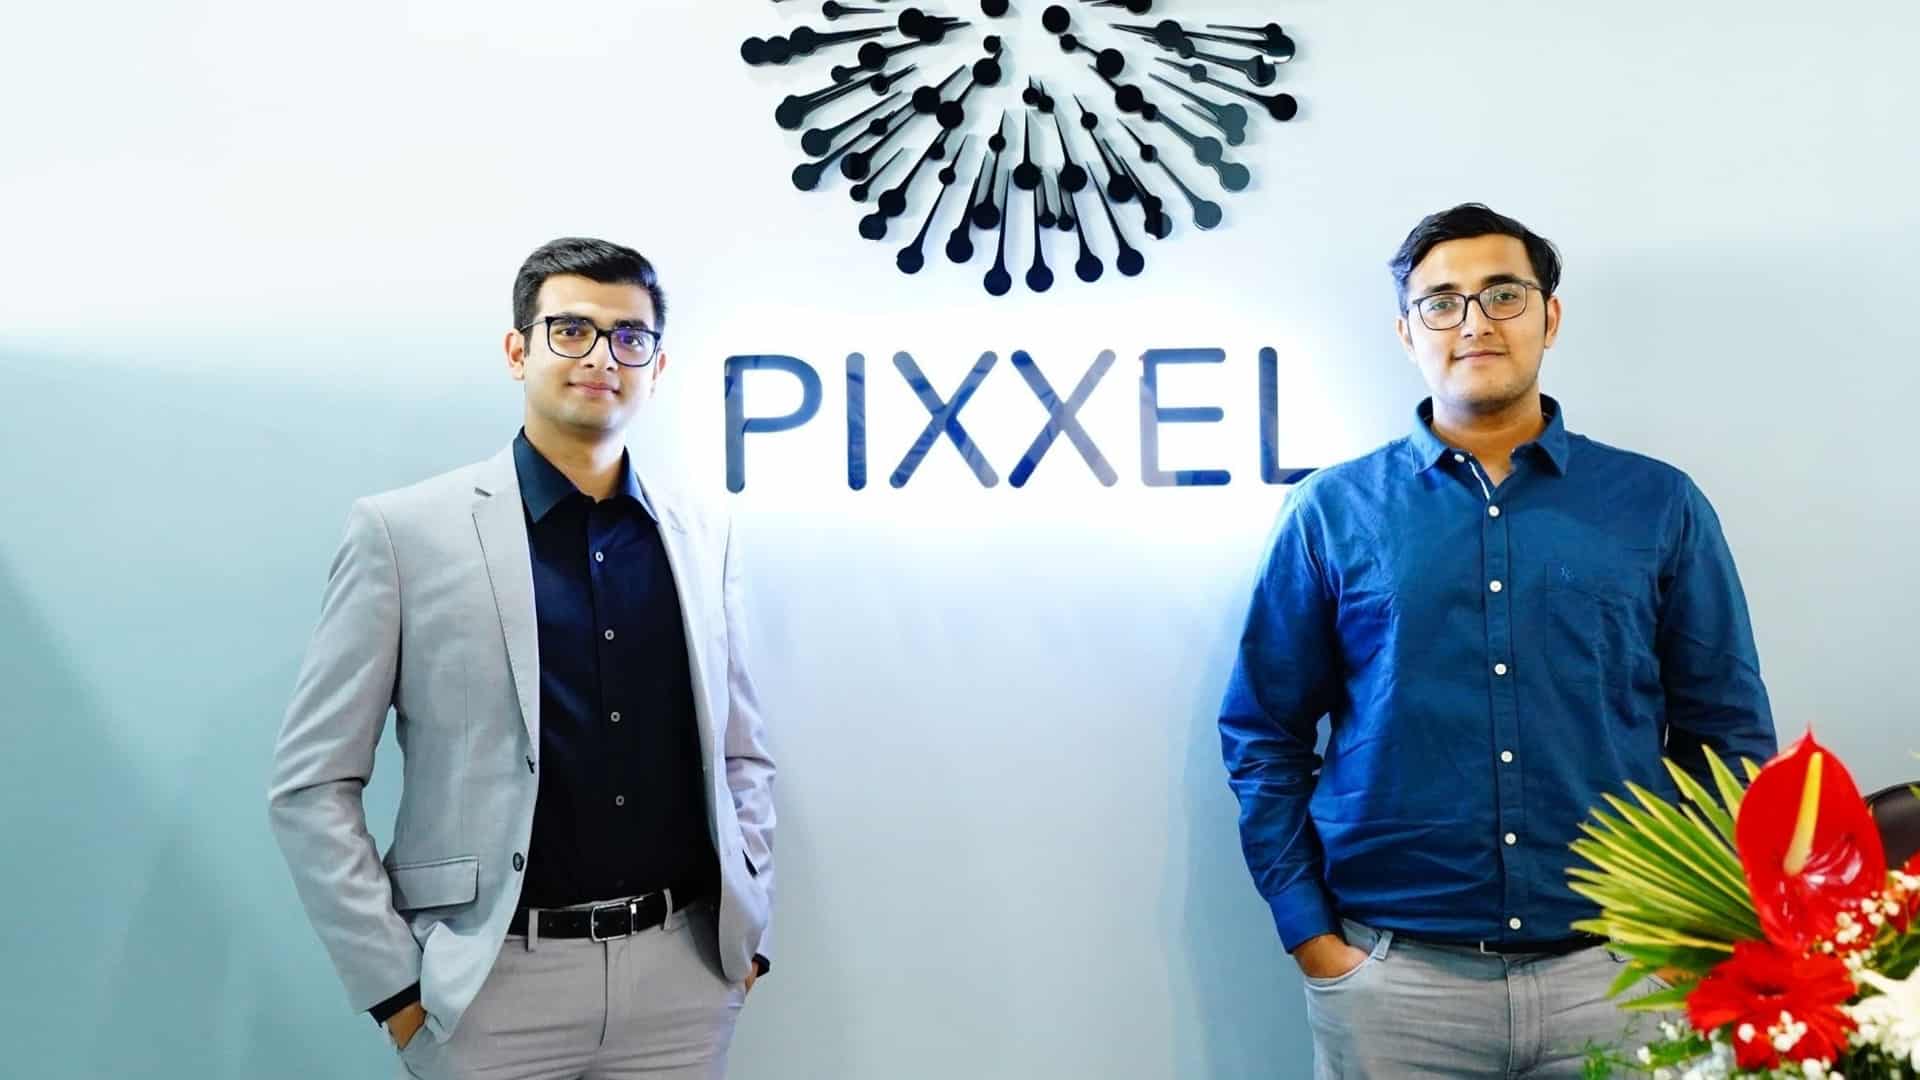 Pixxel wins defence ministry grant to build satellites for IAF